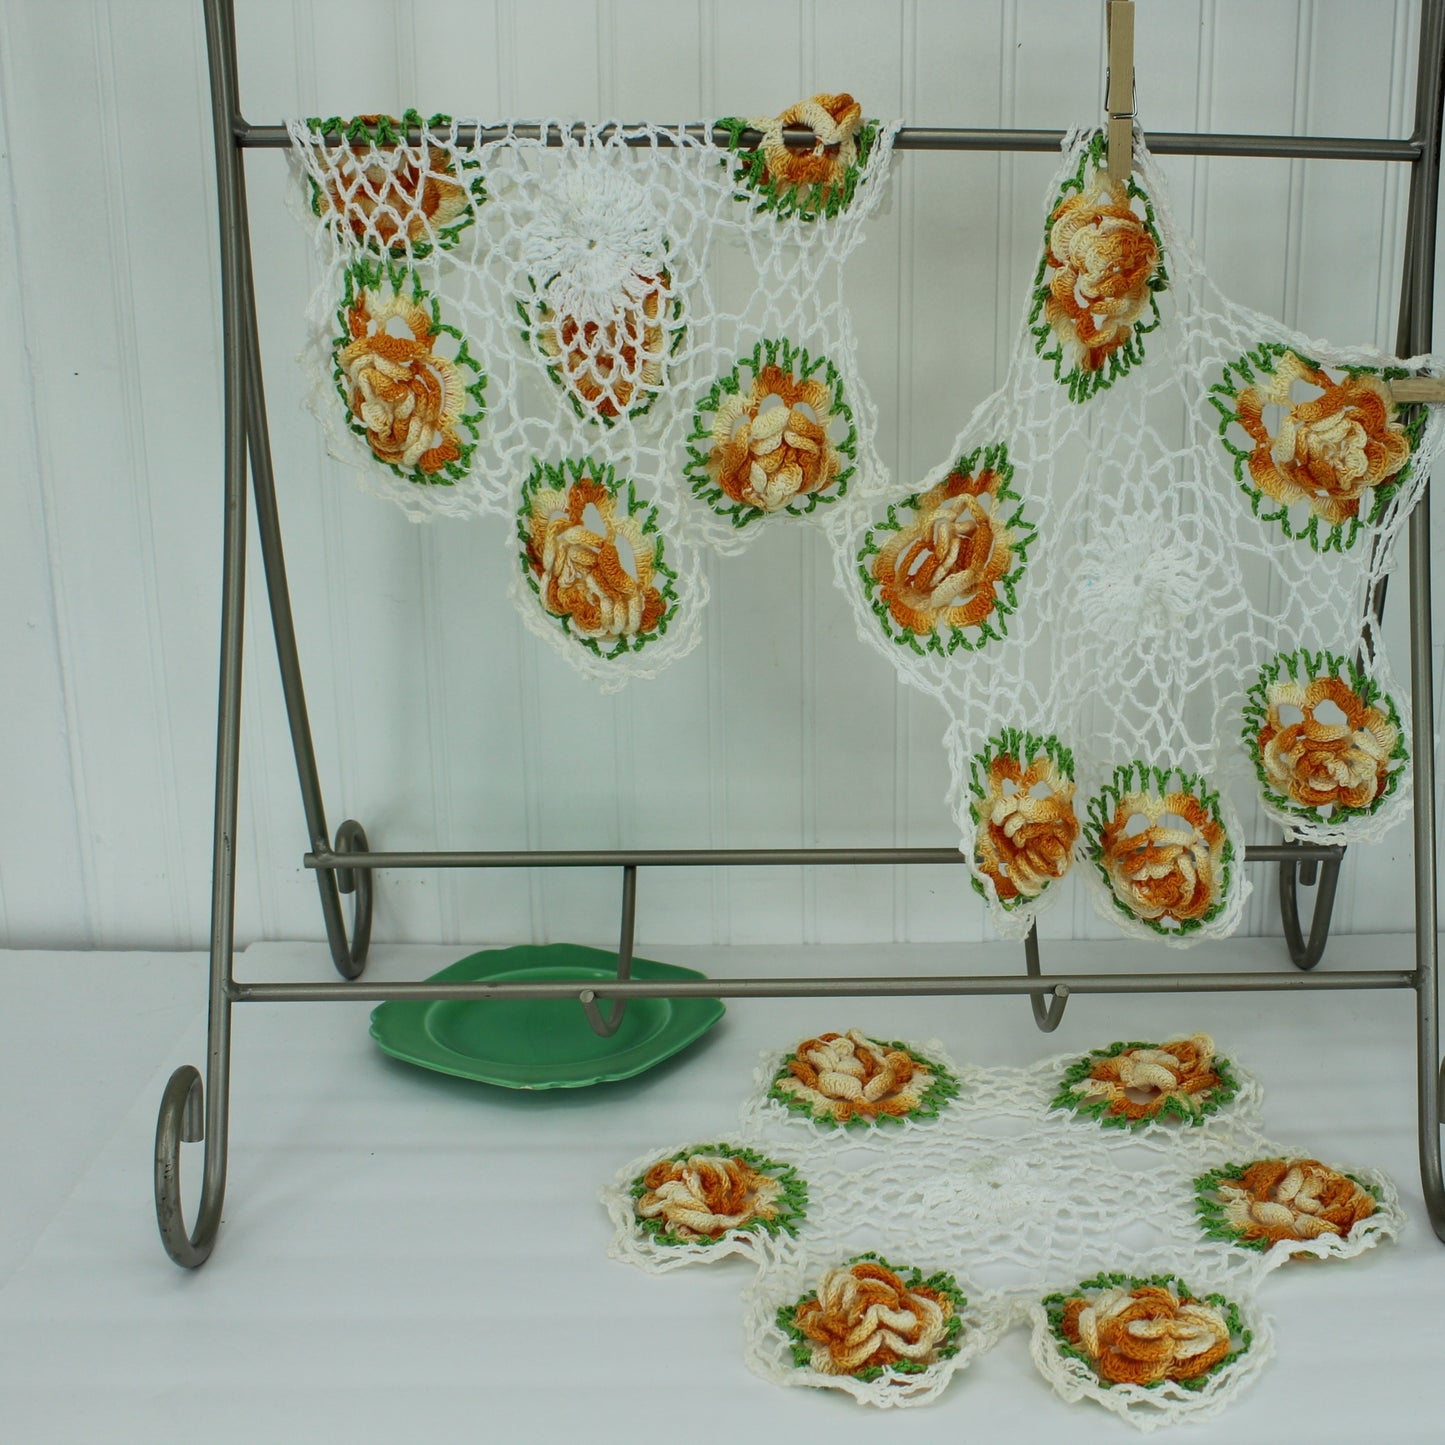 Collection Lot 3 Crochet Doilies 3D Raised Dimensional Flowers Orange Green on White